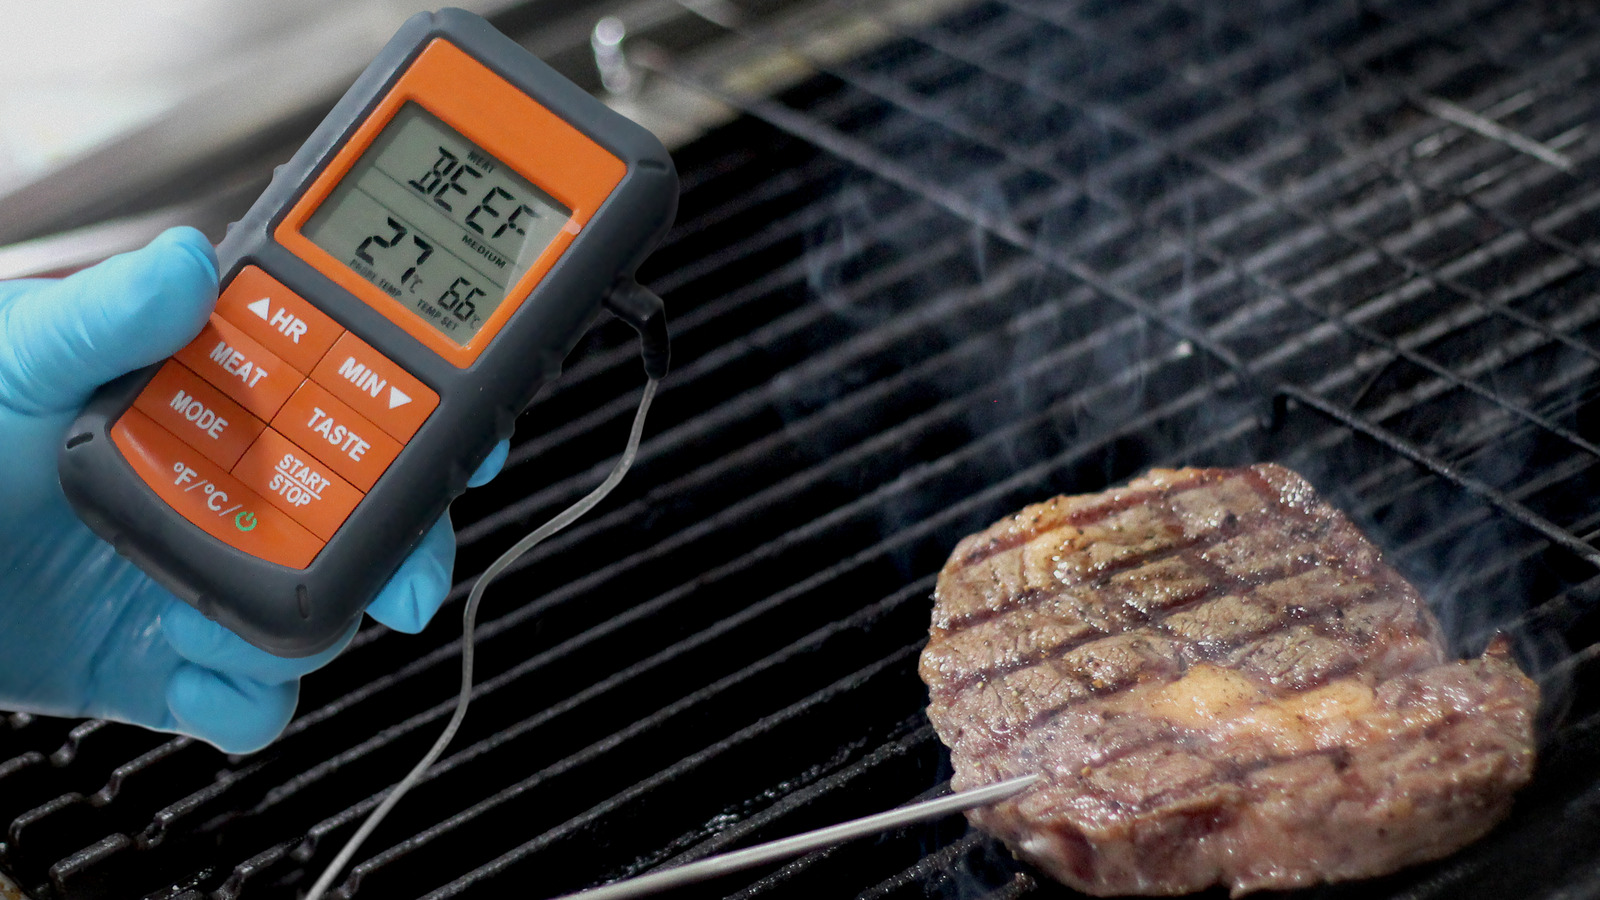 How to Test Meat for Doneness (Even Without a Thermometer)